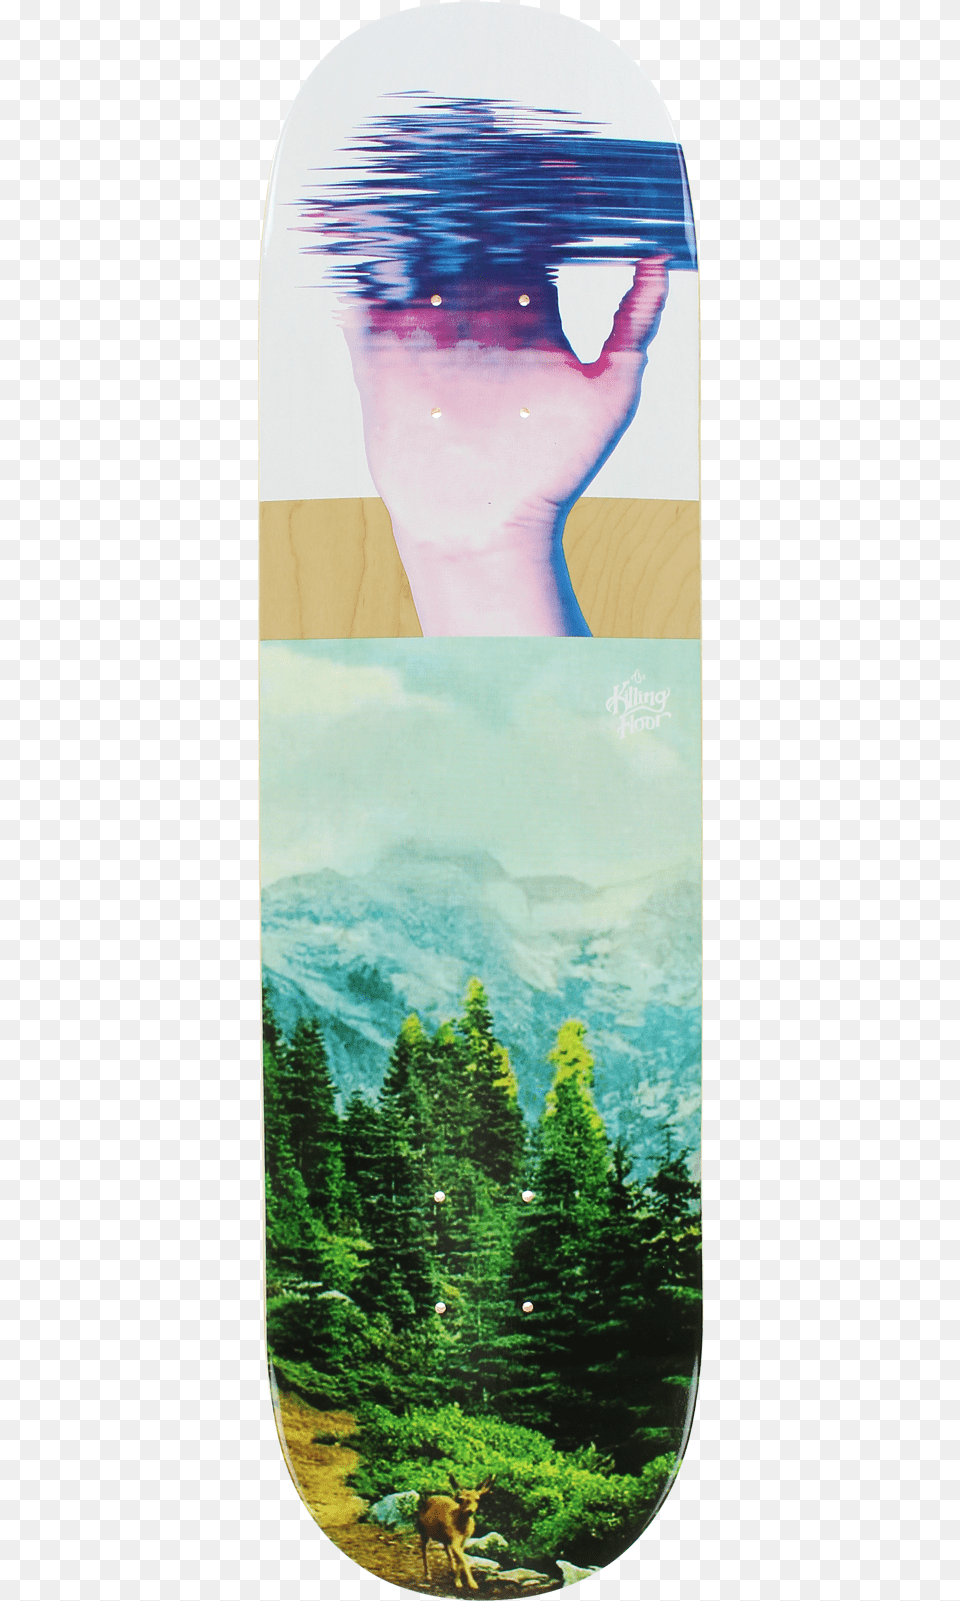 The Killing Floor Into The Void Skateboard Deck Killing Floor Into The Void Skateboard Deck, Tree, Art, Plant, Painting Free Transparent Png